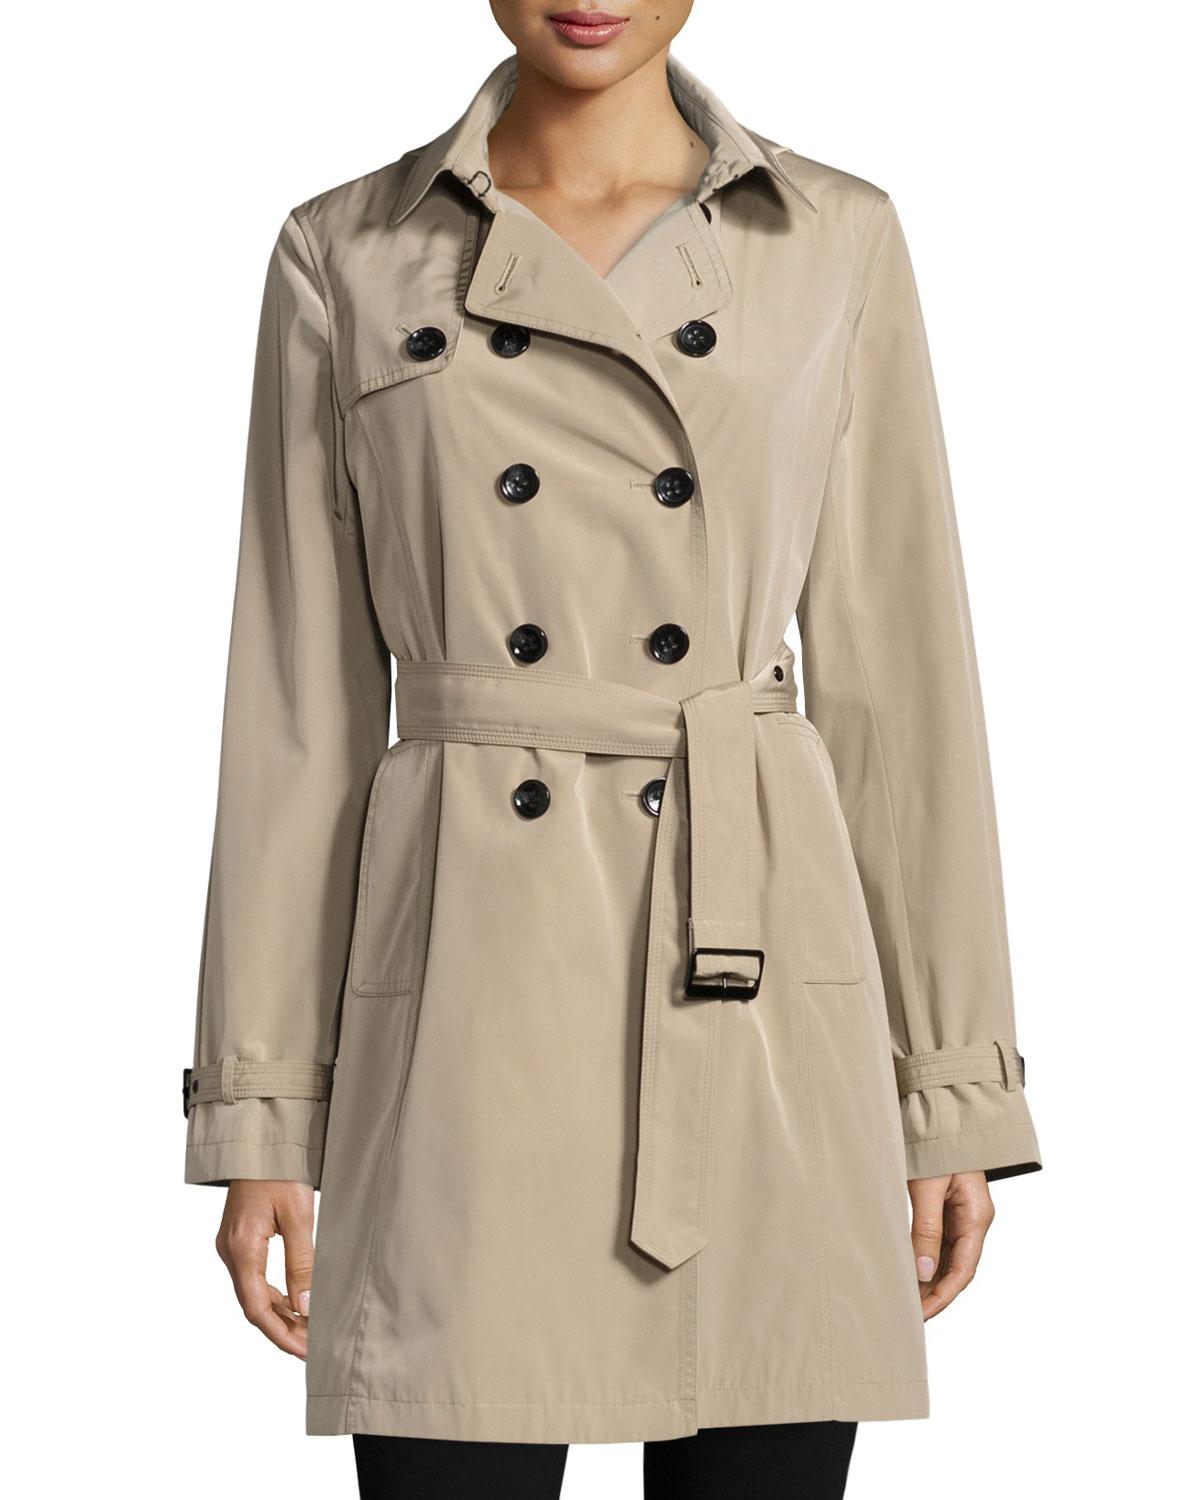 Jane Post Synthetic Belted Tech-fabric Trenchcoat in Brown - Lyst